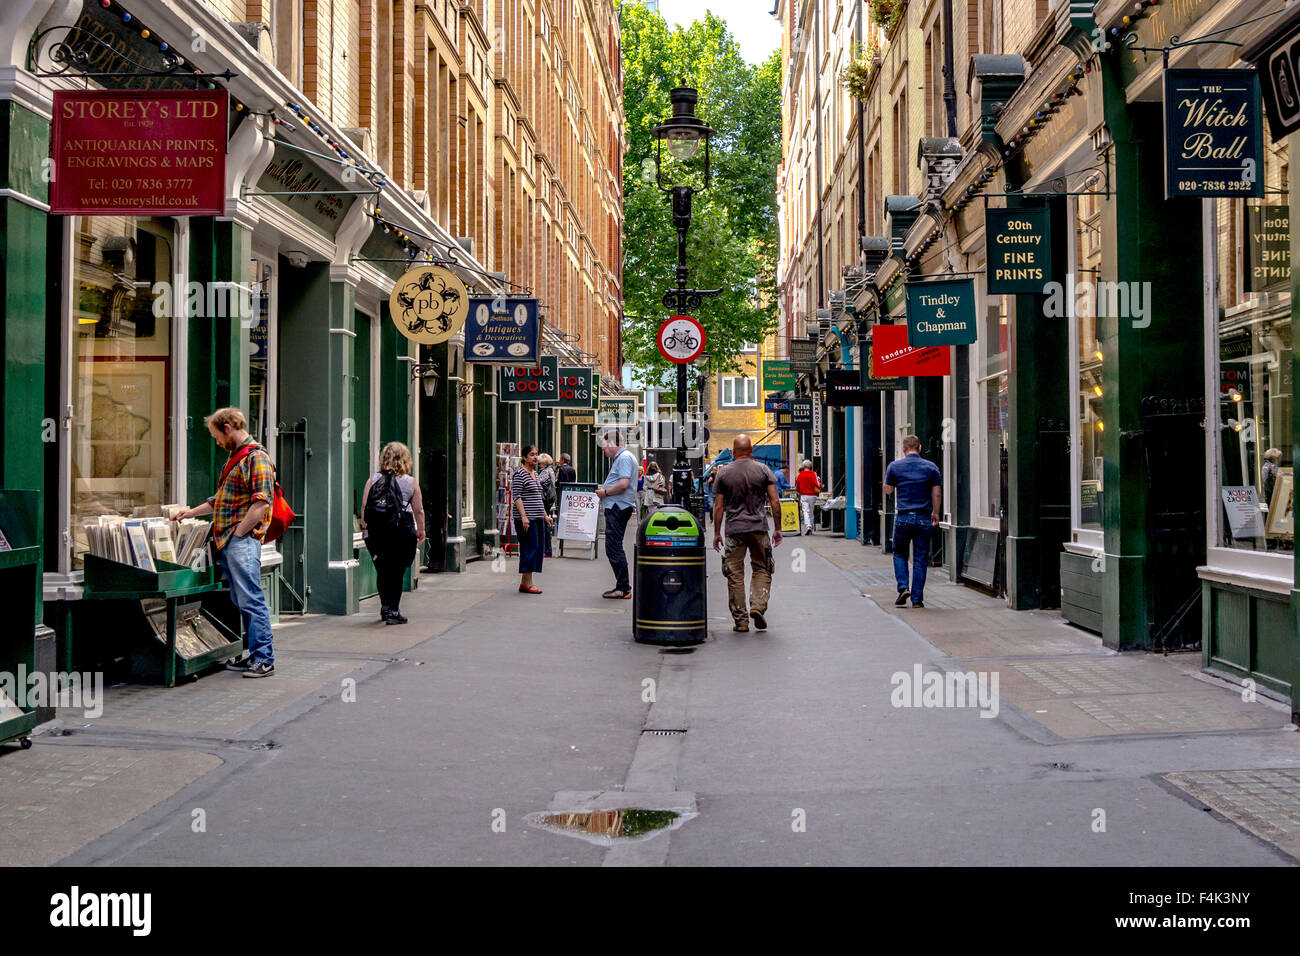 Cecil Court between St Martins Lane and the Charing Cross road in London home to specialist sellers of books, prints and maps Stock Photo